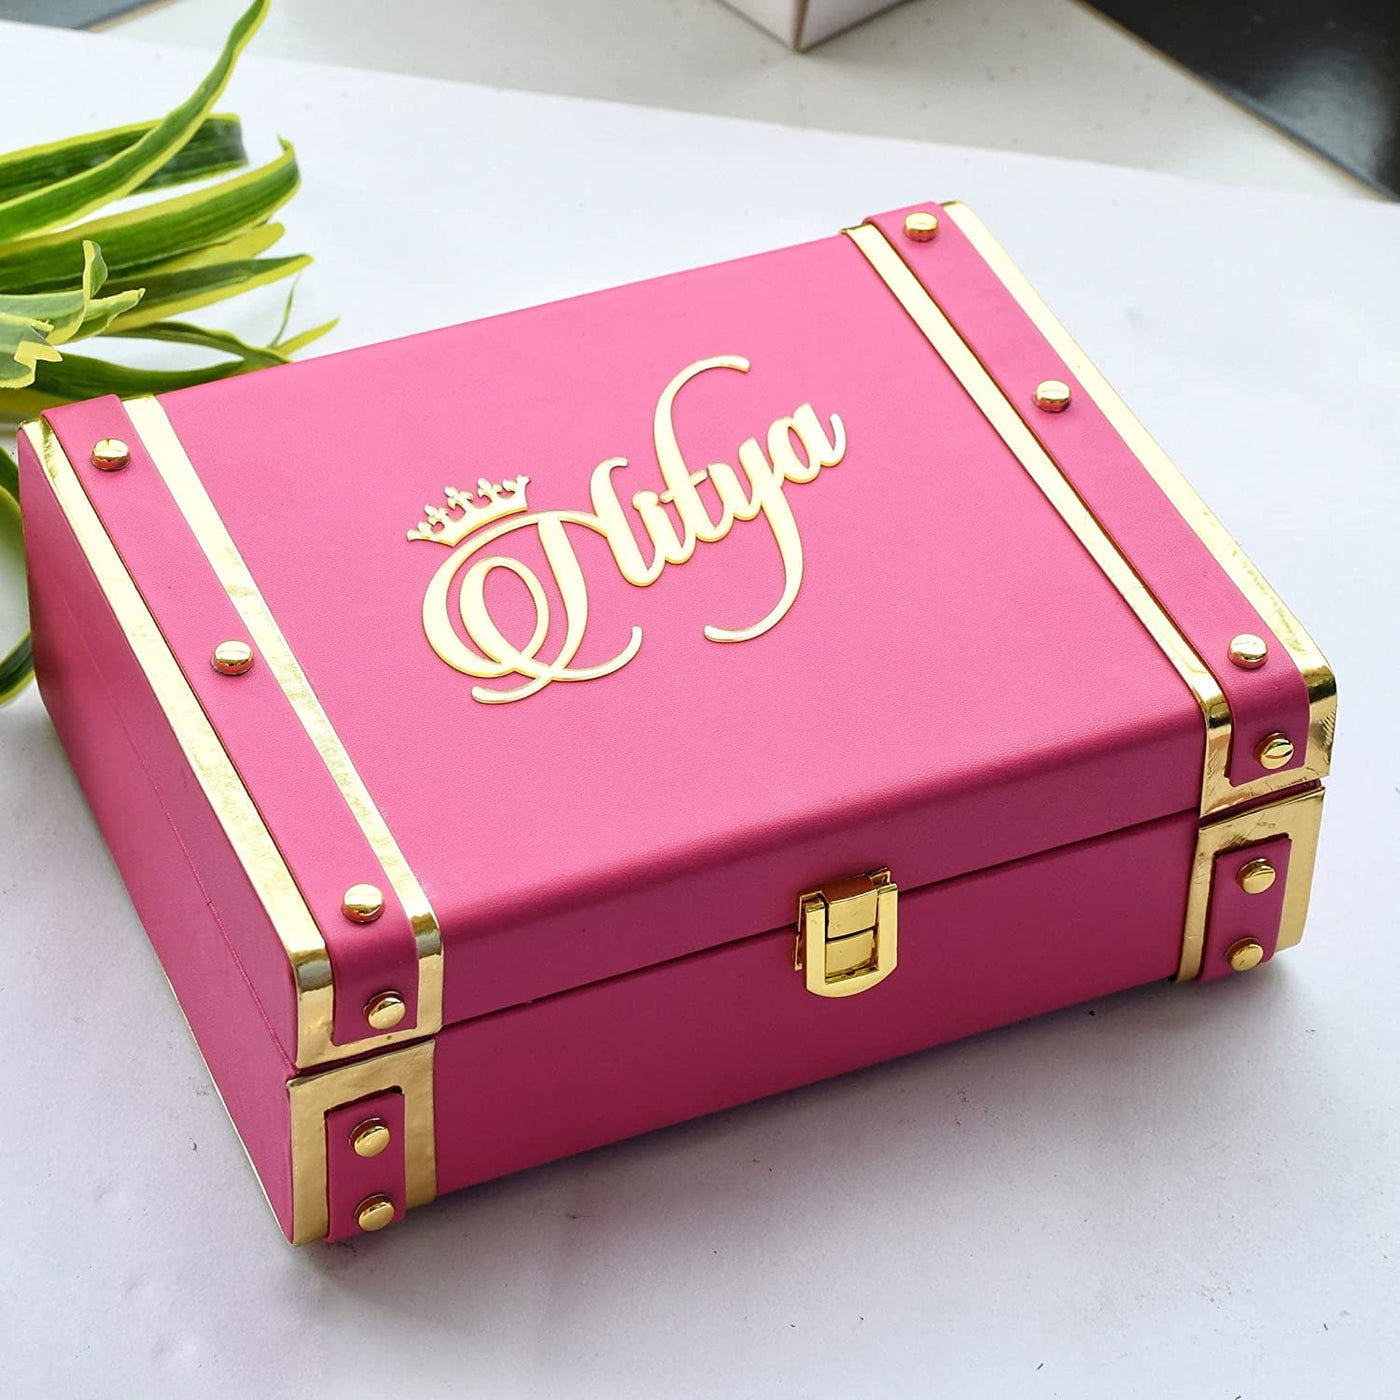 New Jaipur Handicraft Gift Trunks 💛 Assorted colors LAMANSH® Personalized Trunk boxes with custom name plates / Perfect for Gifting 🎁 & Giveaways